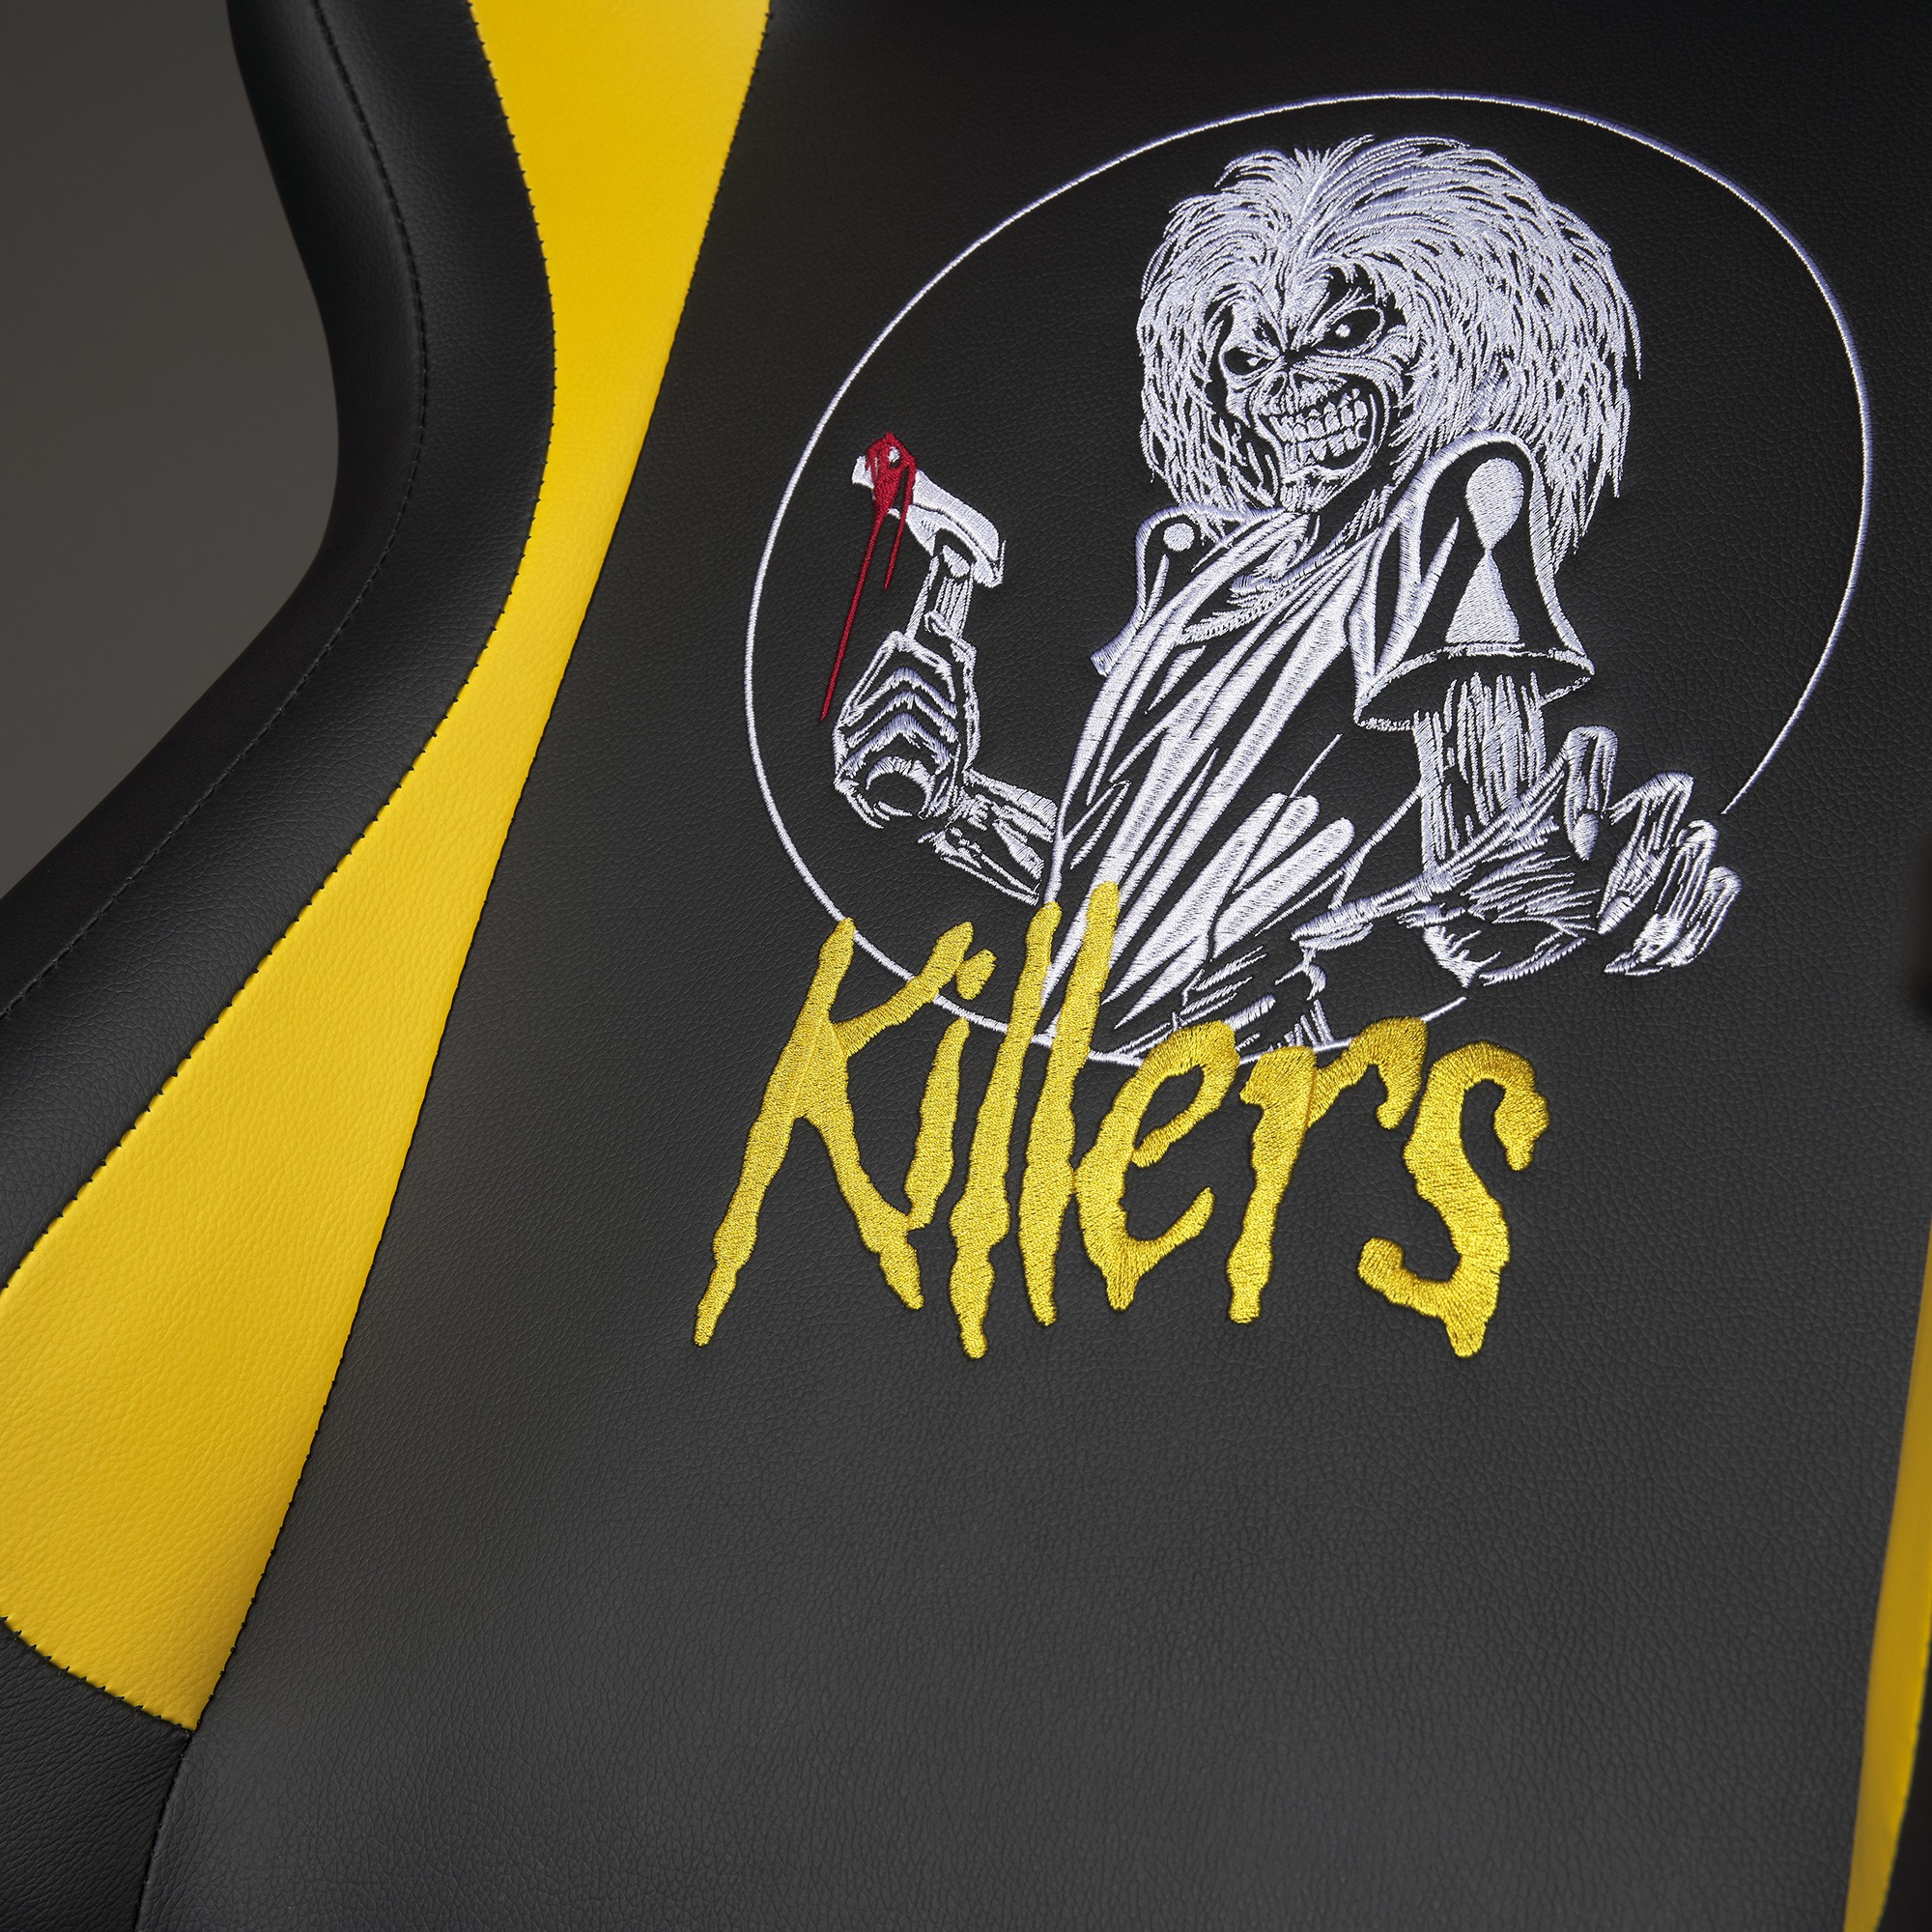 Chaise gaming Killers Iron Maiden